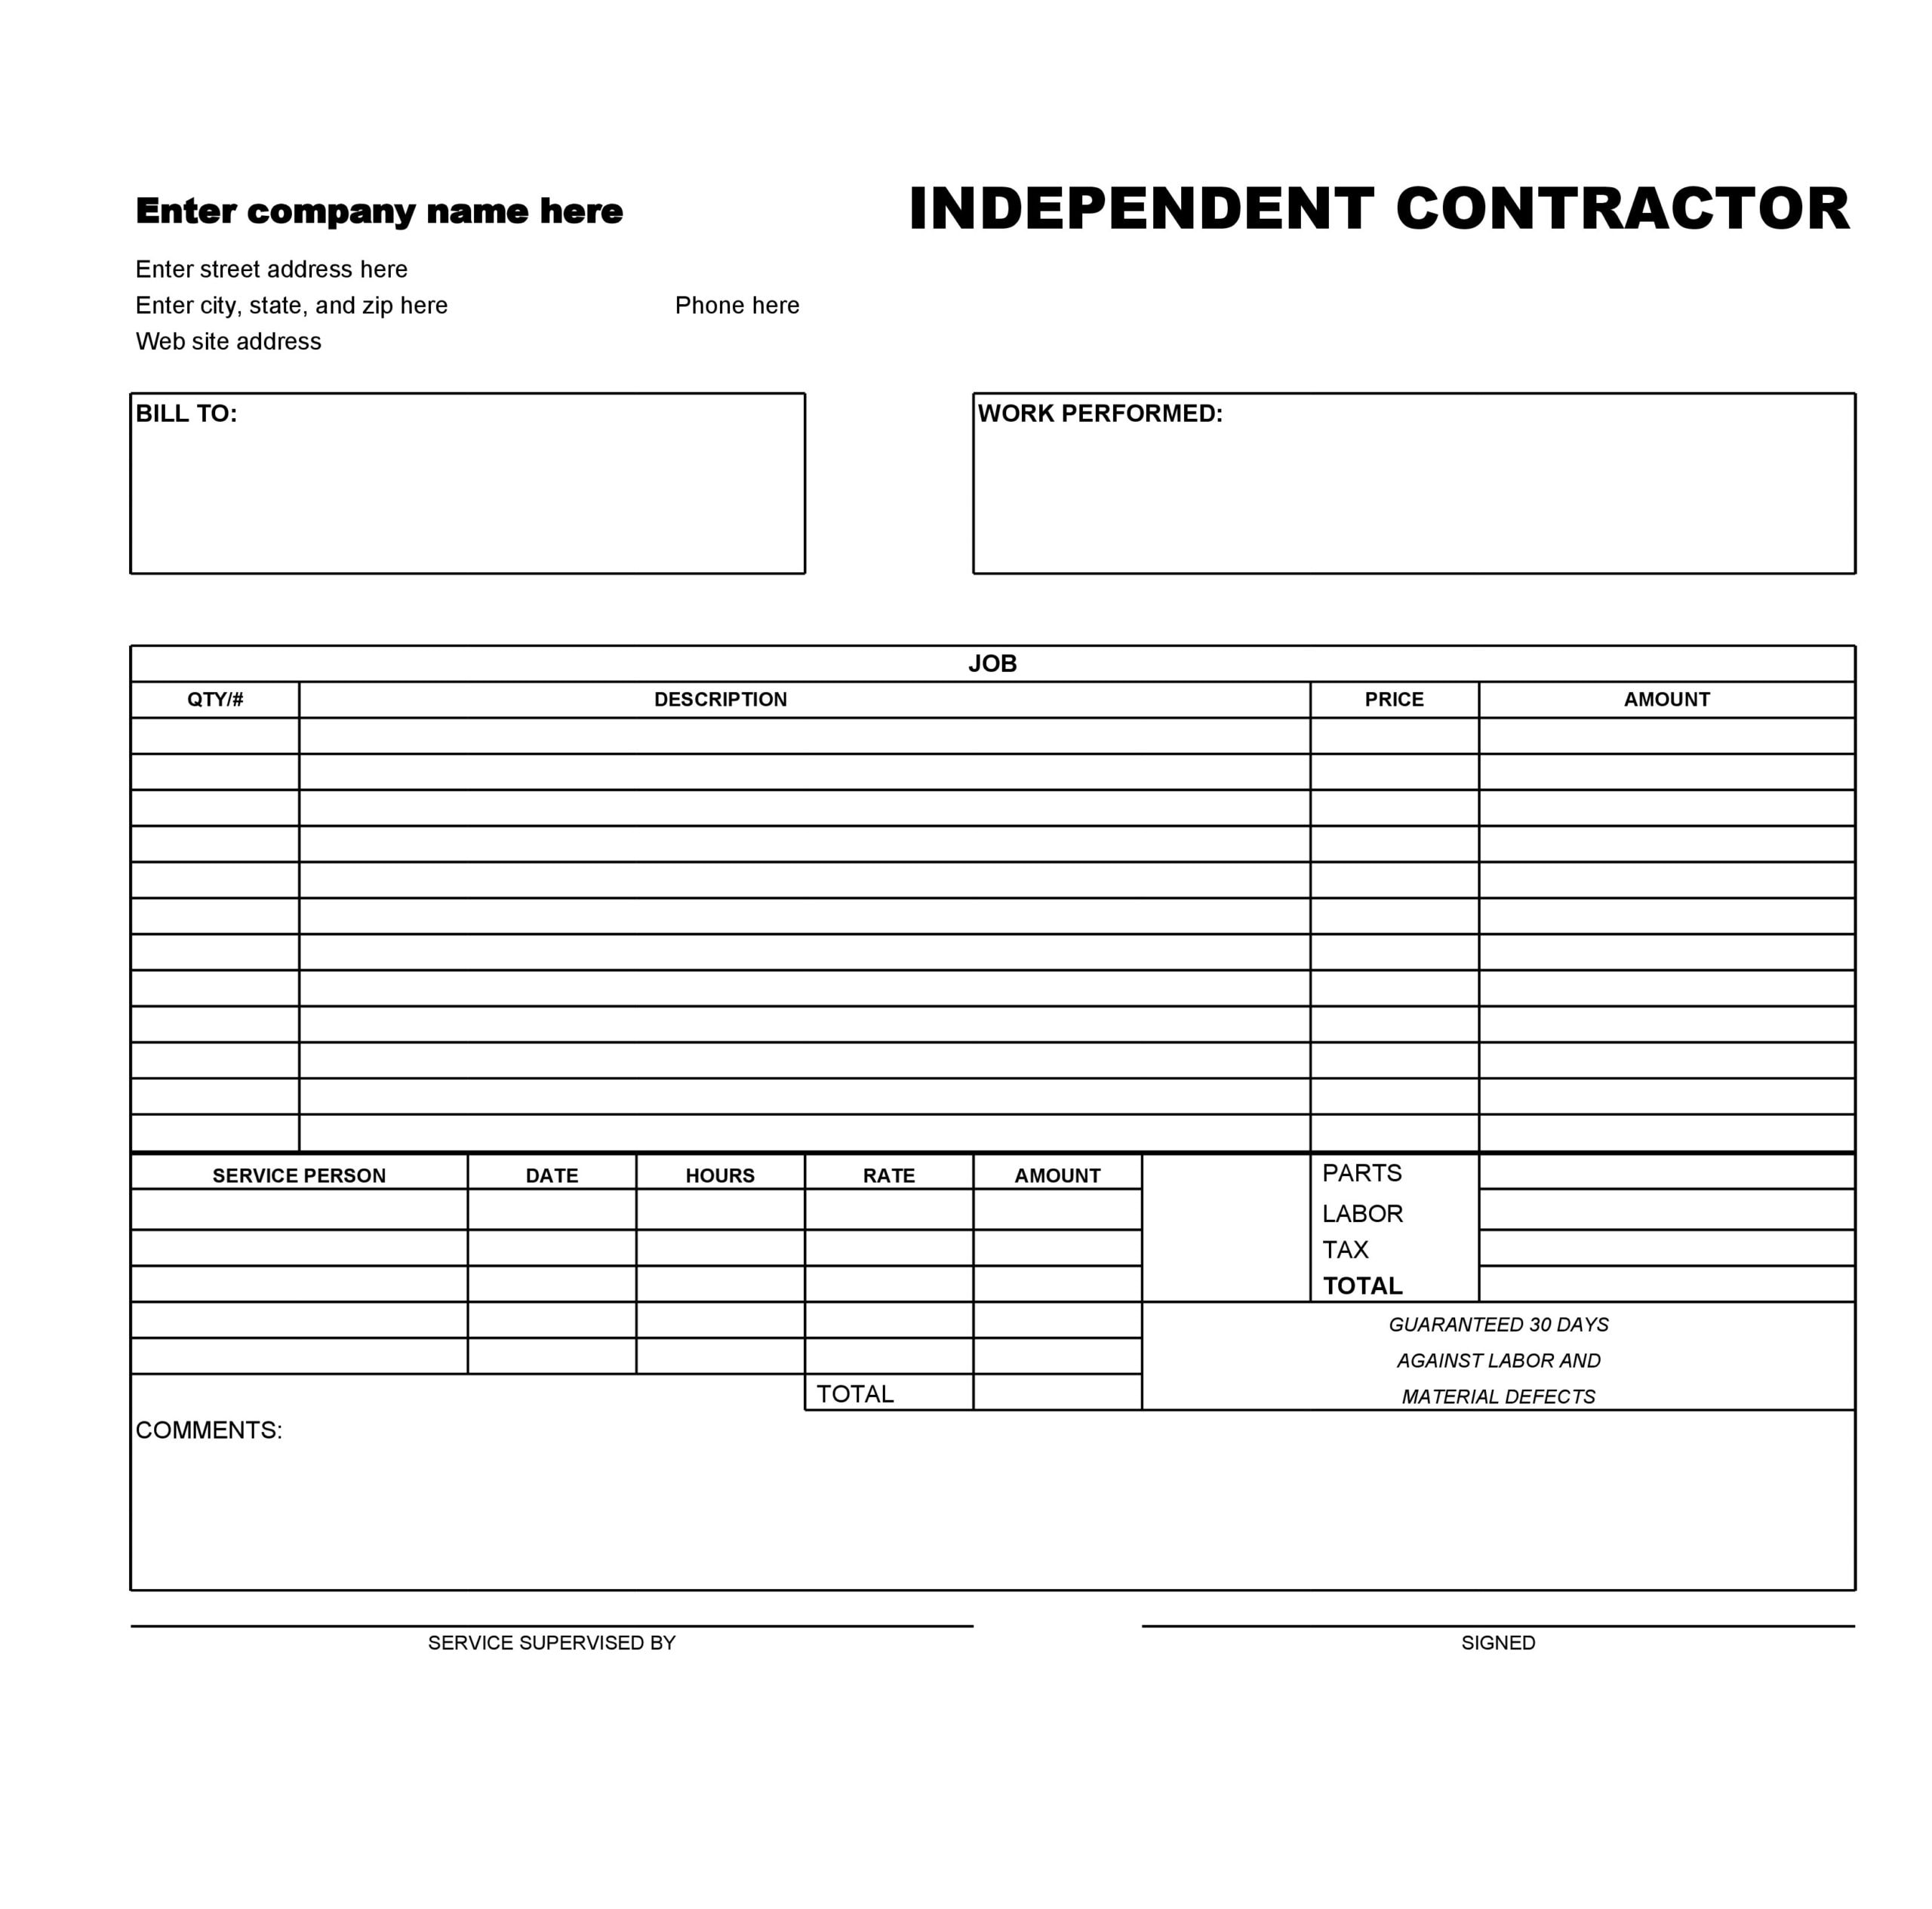 28 Independent Contractor Invoice Templates (FREE)